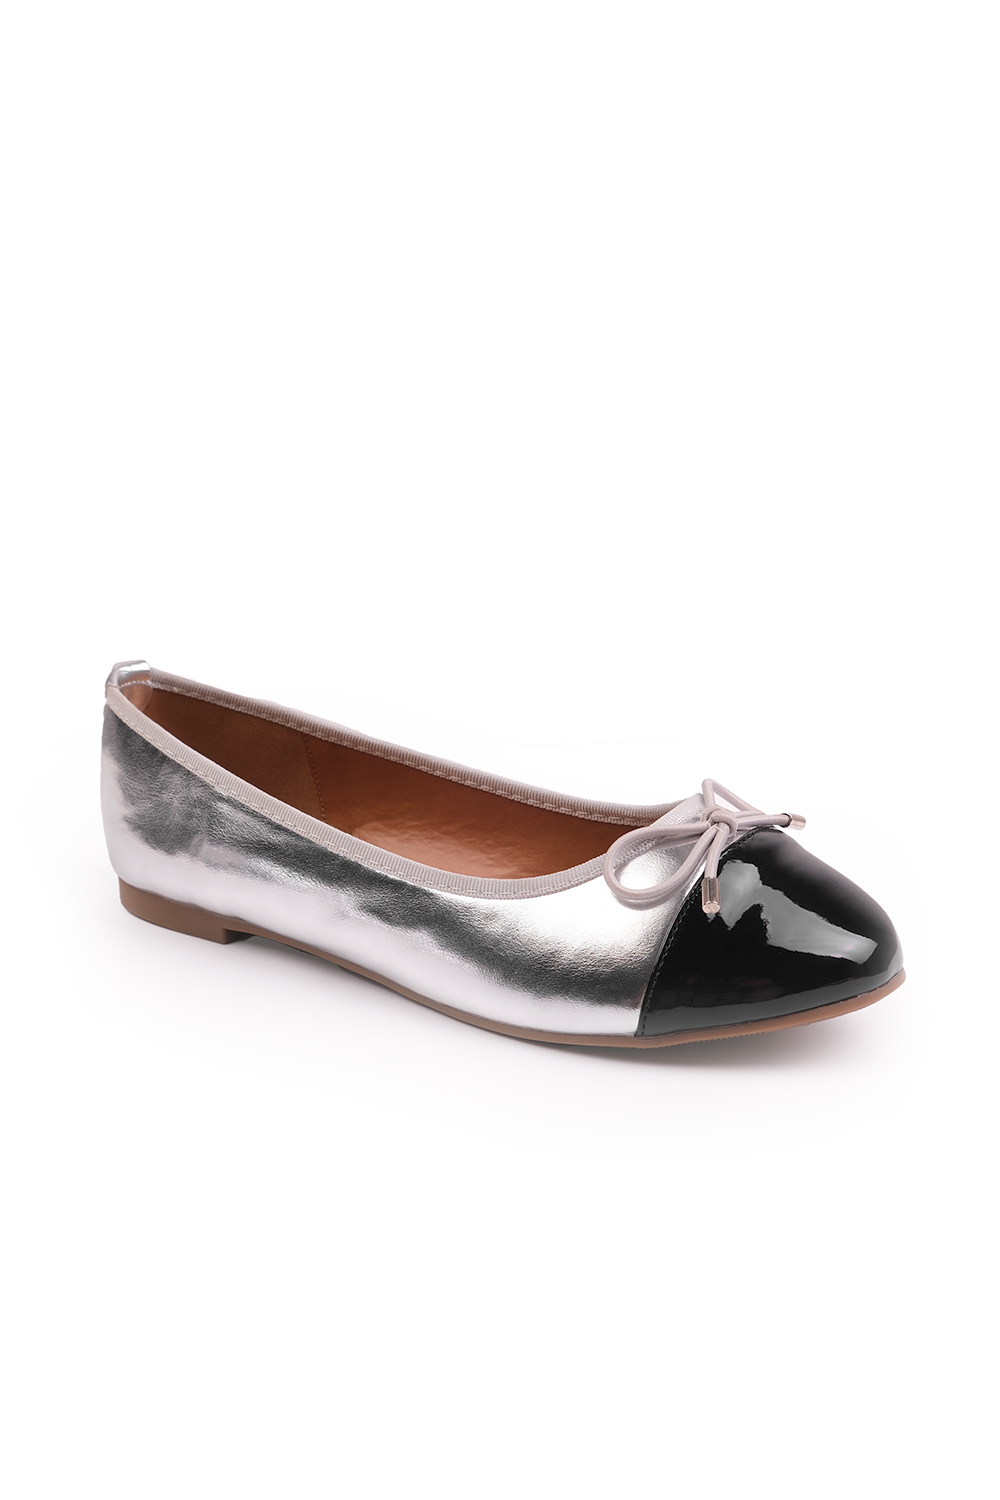 JANICE BALLERINA FLATS WITH FRON BOW DETAIL IN SILVER METALLIC